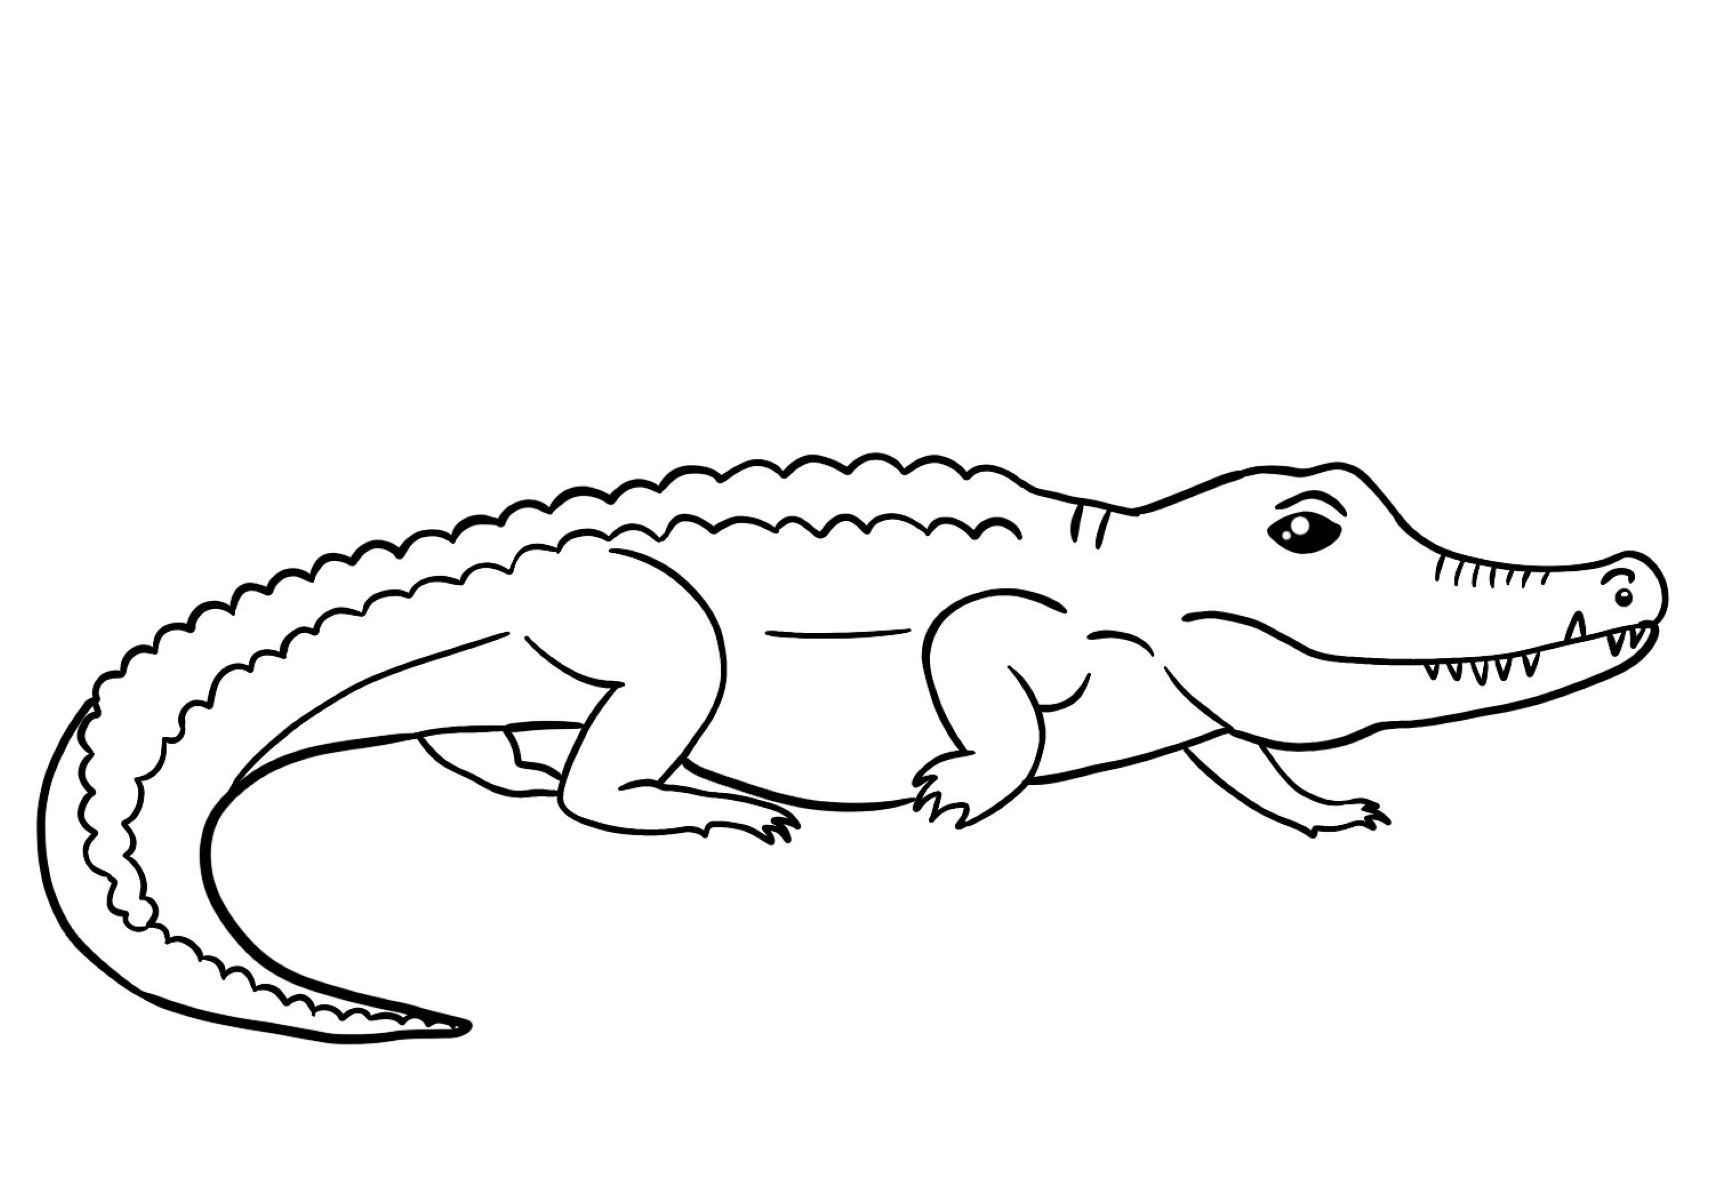 How To Draw An Easy Alligator